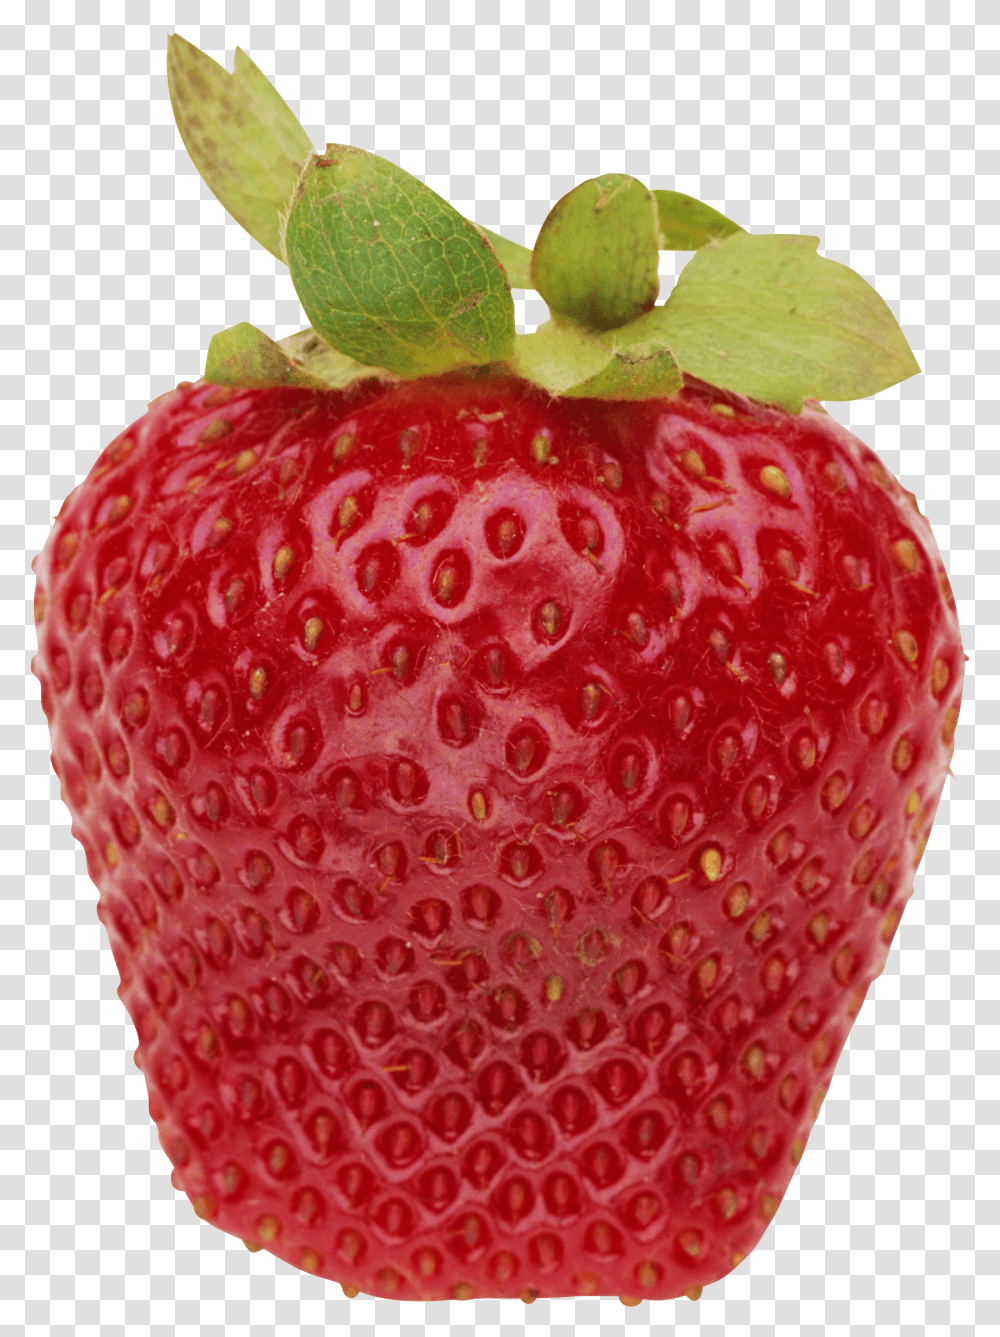 Strawberry Images Strawberry Flashcard Transparent Png